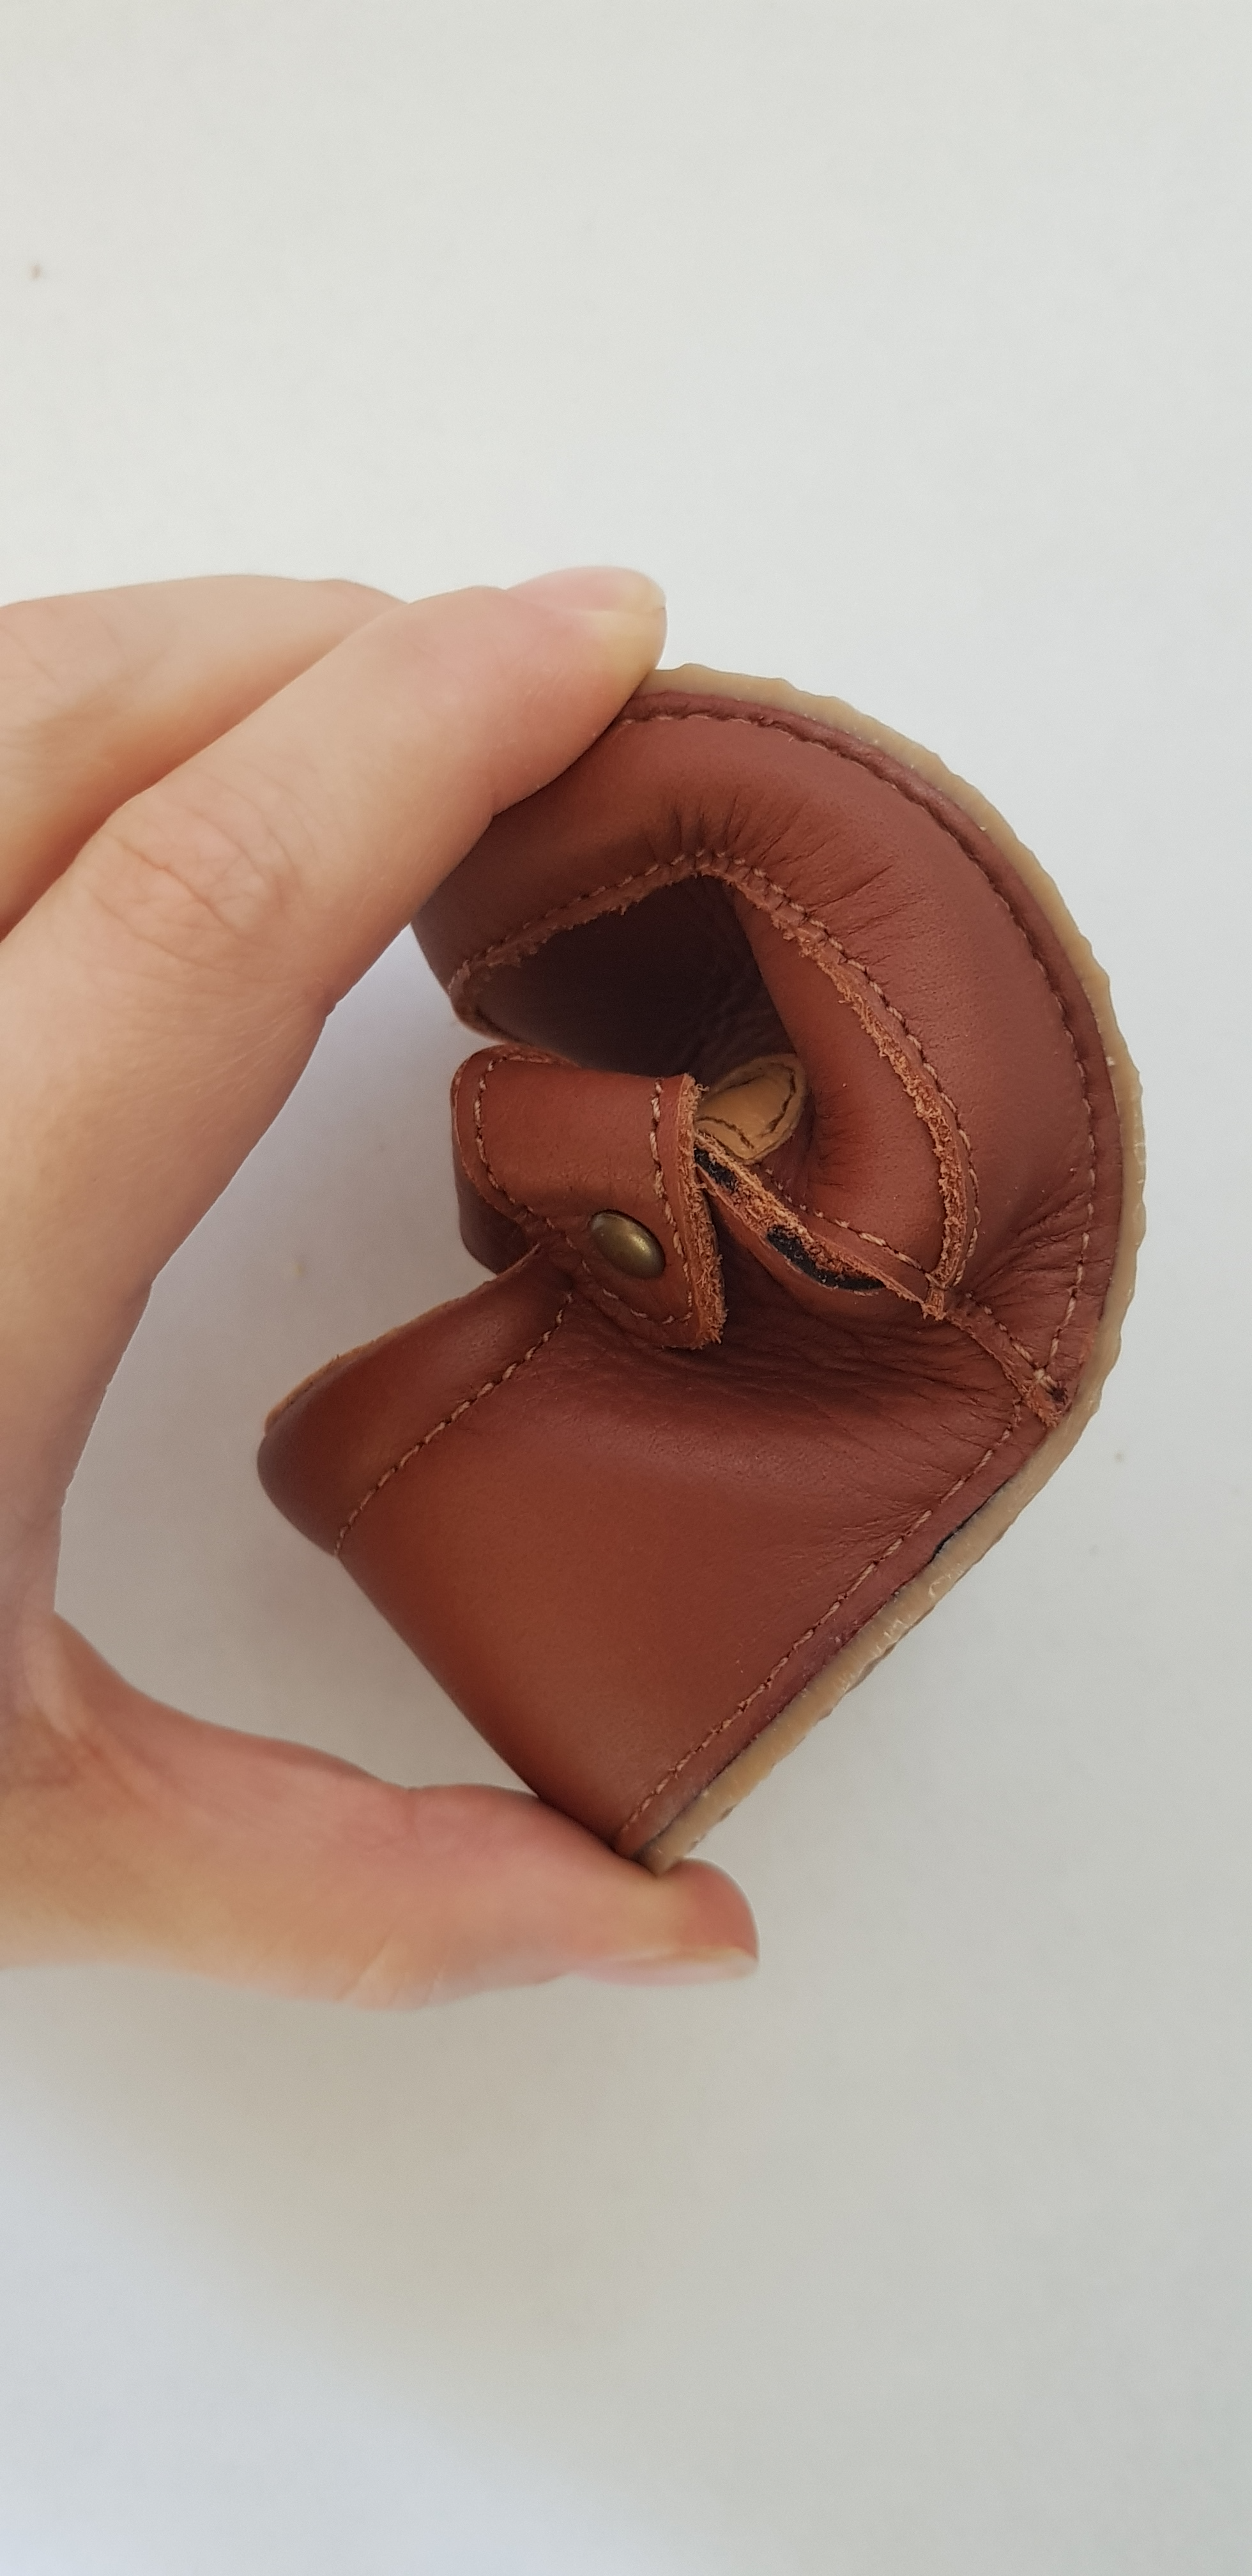 Flexible brown t-bar shoes in vintage style brown, for children and toddlers, barefoot-friendly